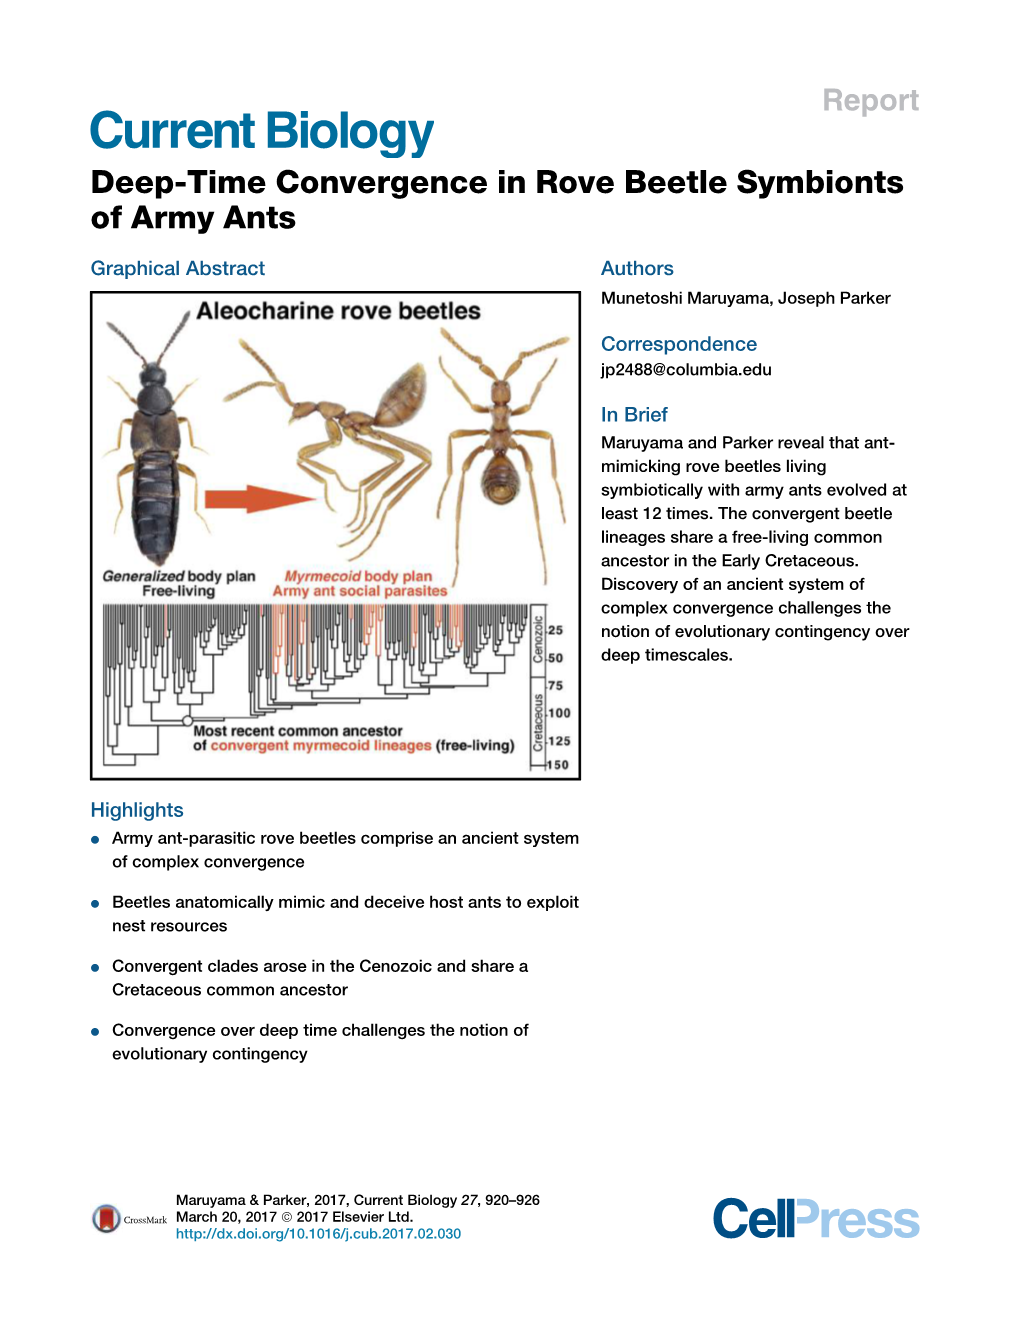 Deep-Time Convergence in Rove Beetle Symbionts of Army Ants